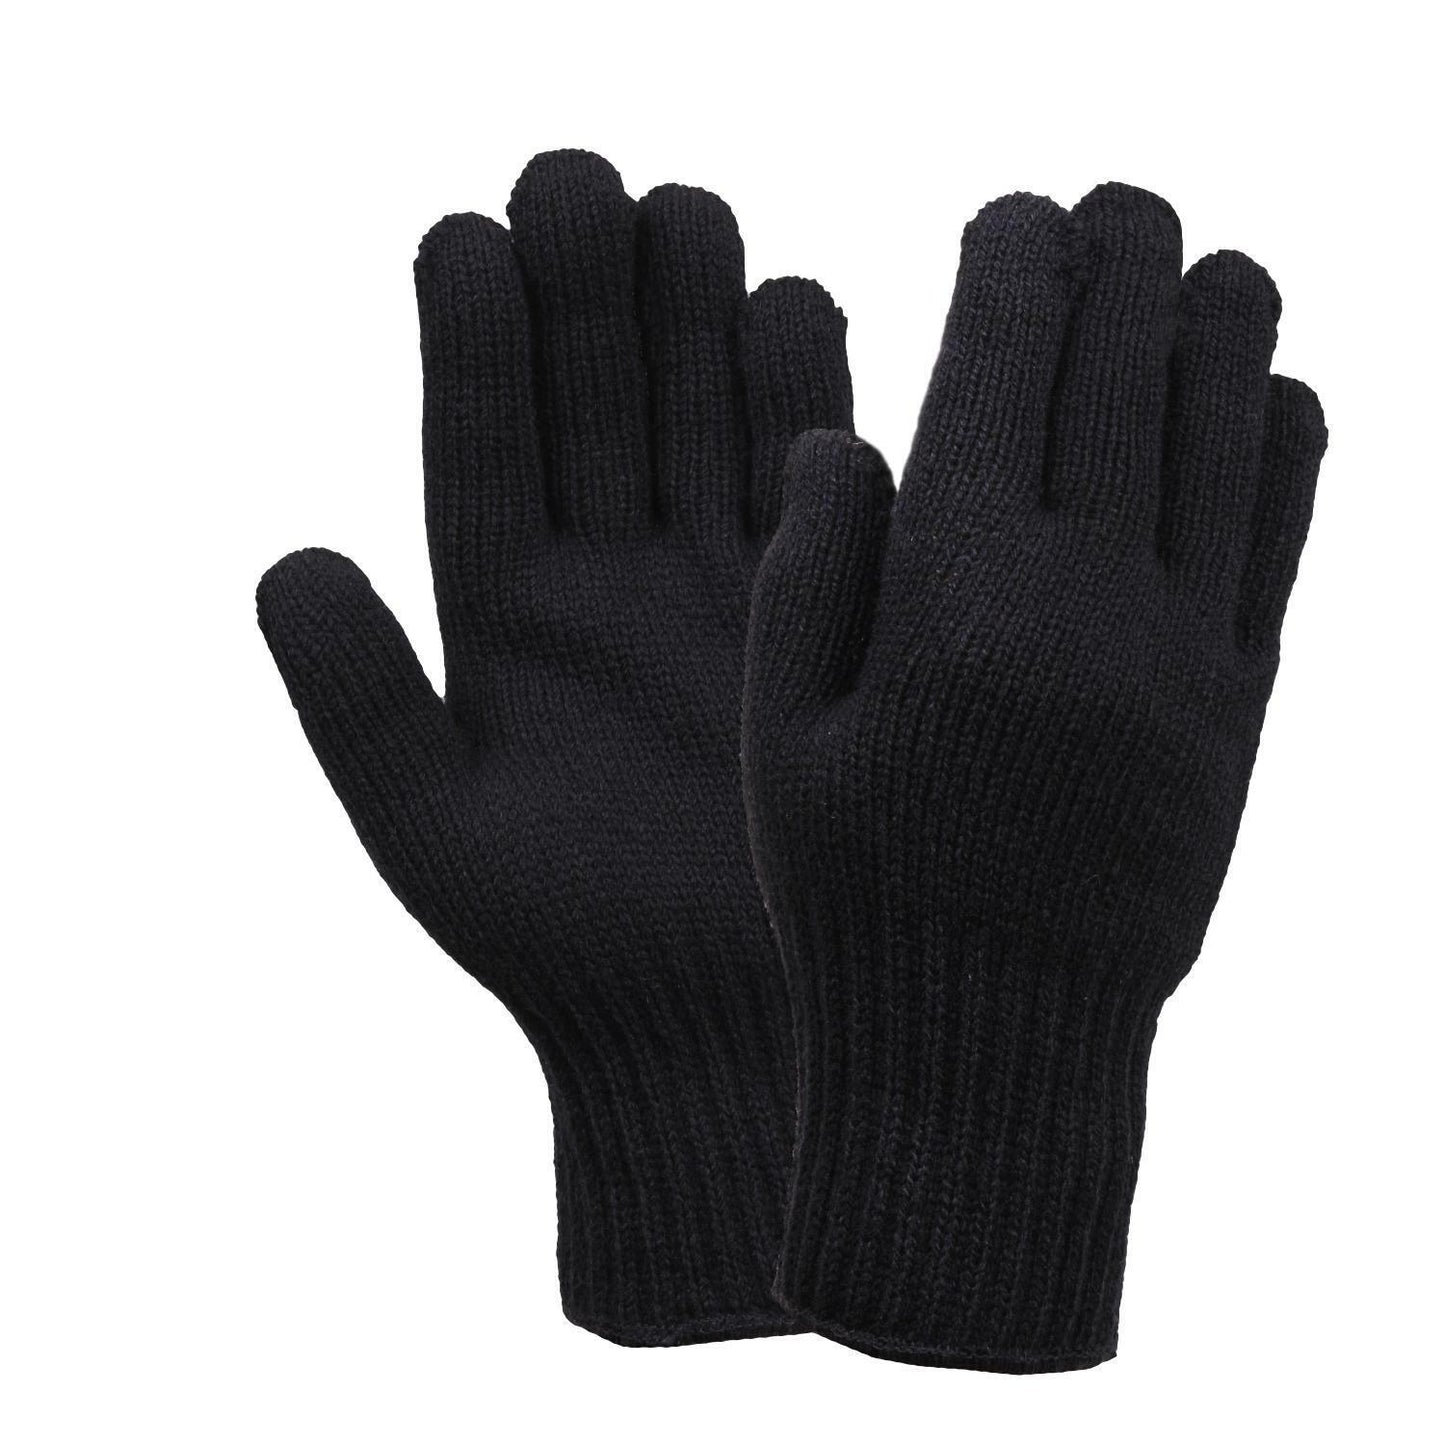 U.S MILITARY STYLE D3A COLD WEATHER GLOVE LINERS 85% WOOL 15% NYLON SIZE MEDIUM